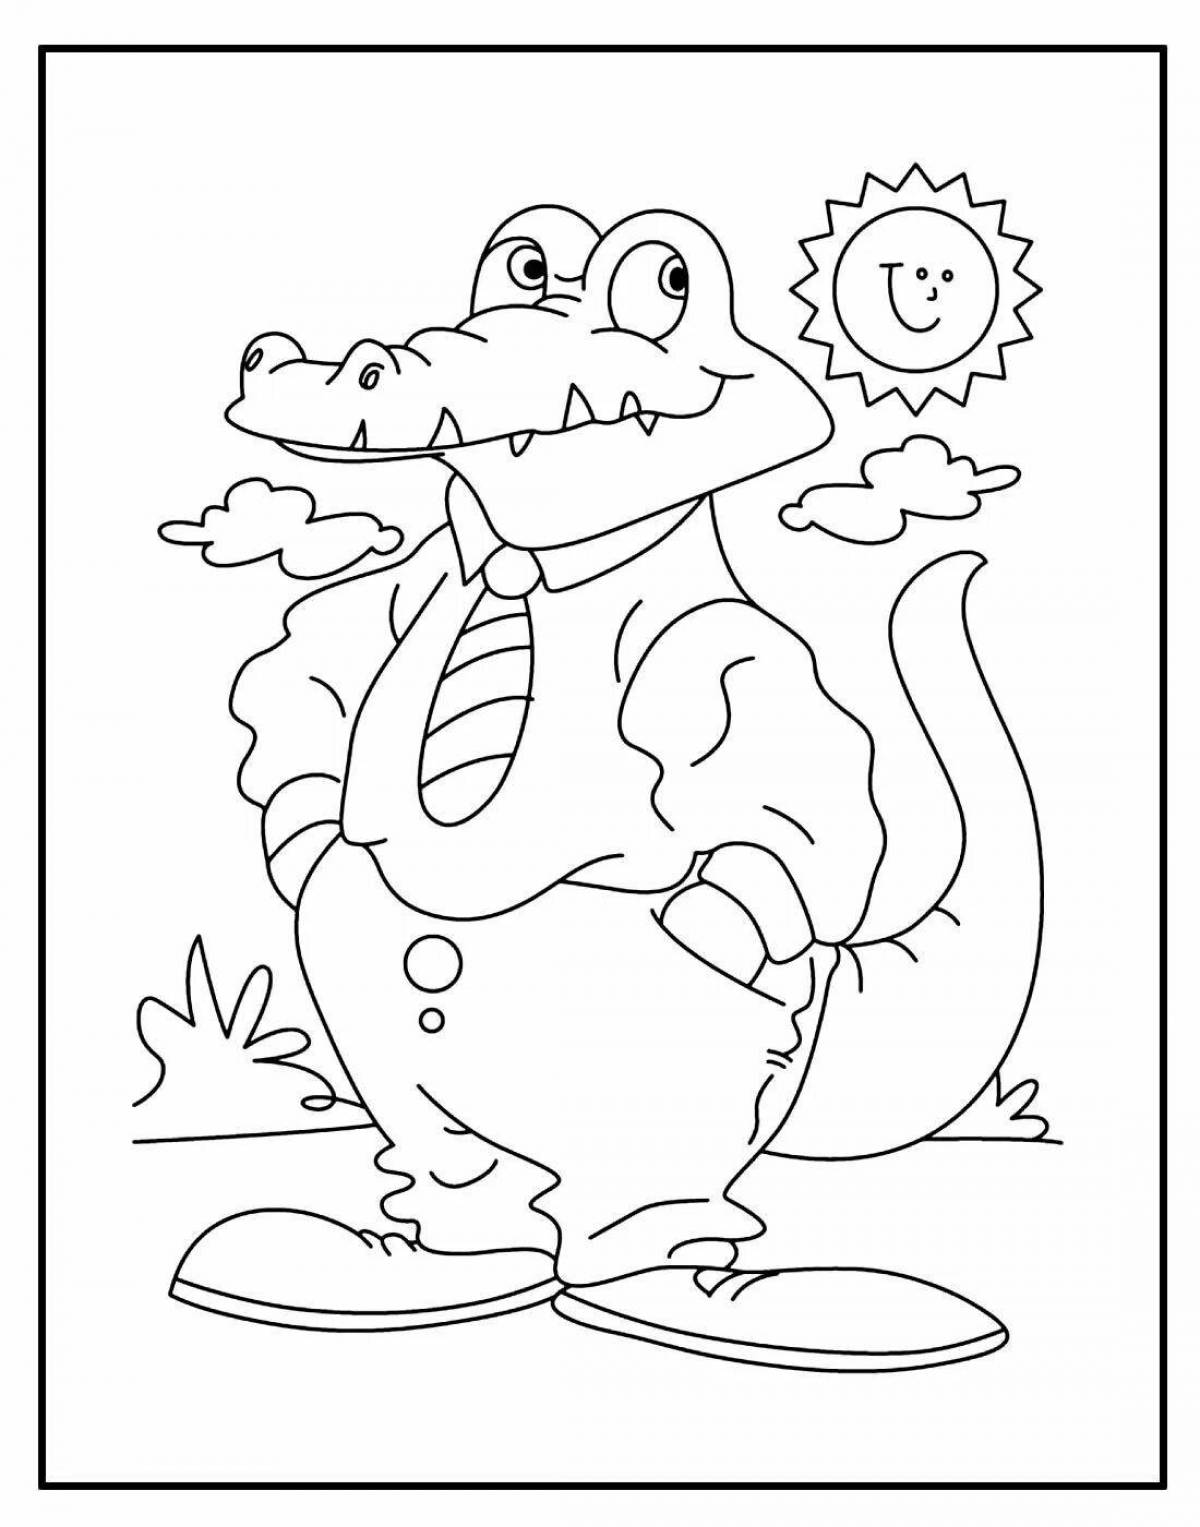 Coloring pages of the nobility heroes of Chukovsky's fairy tales